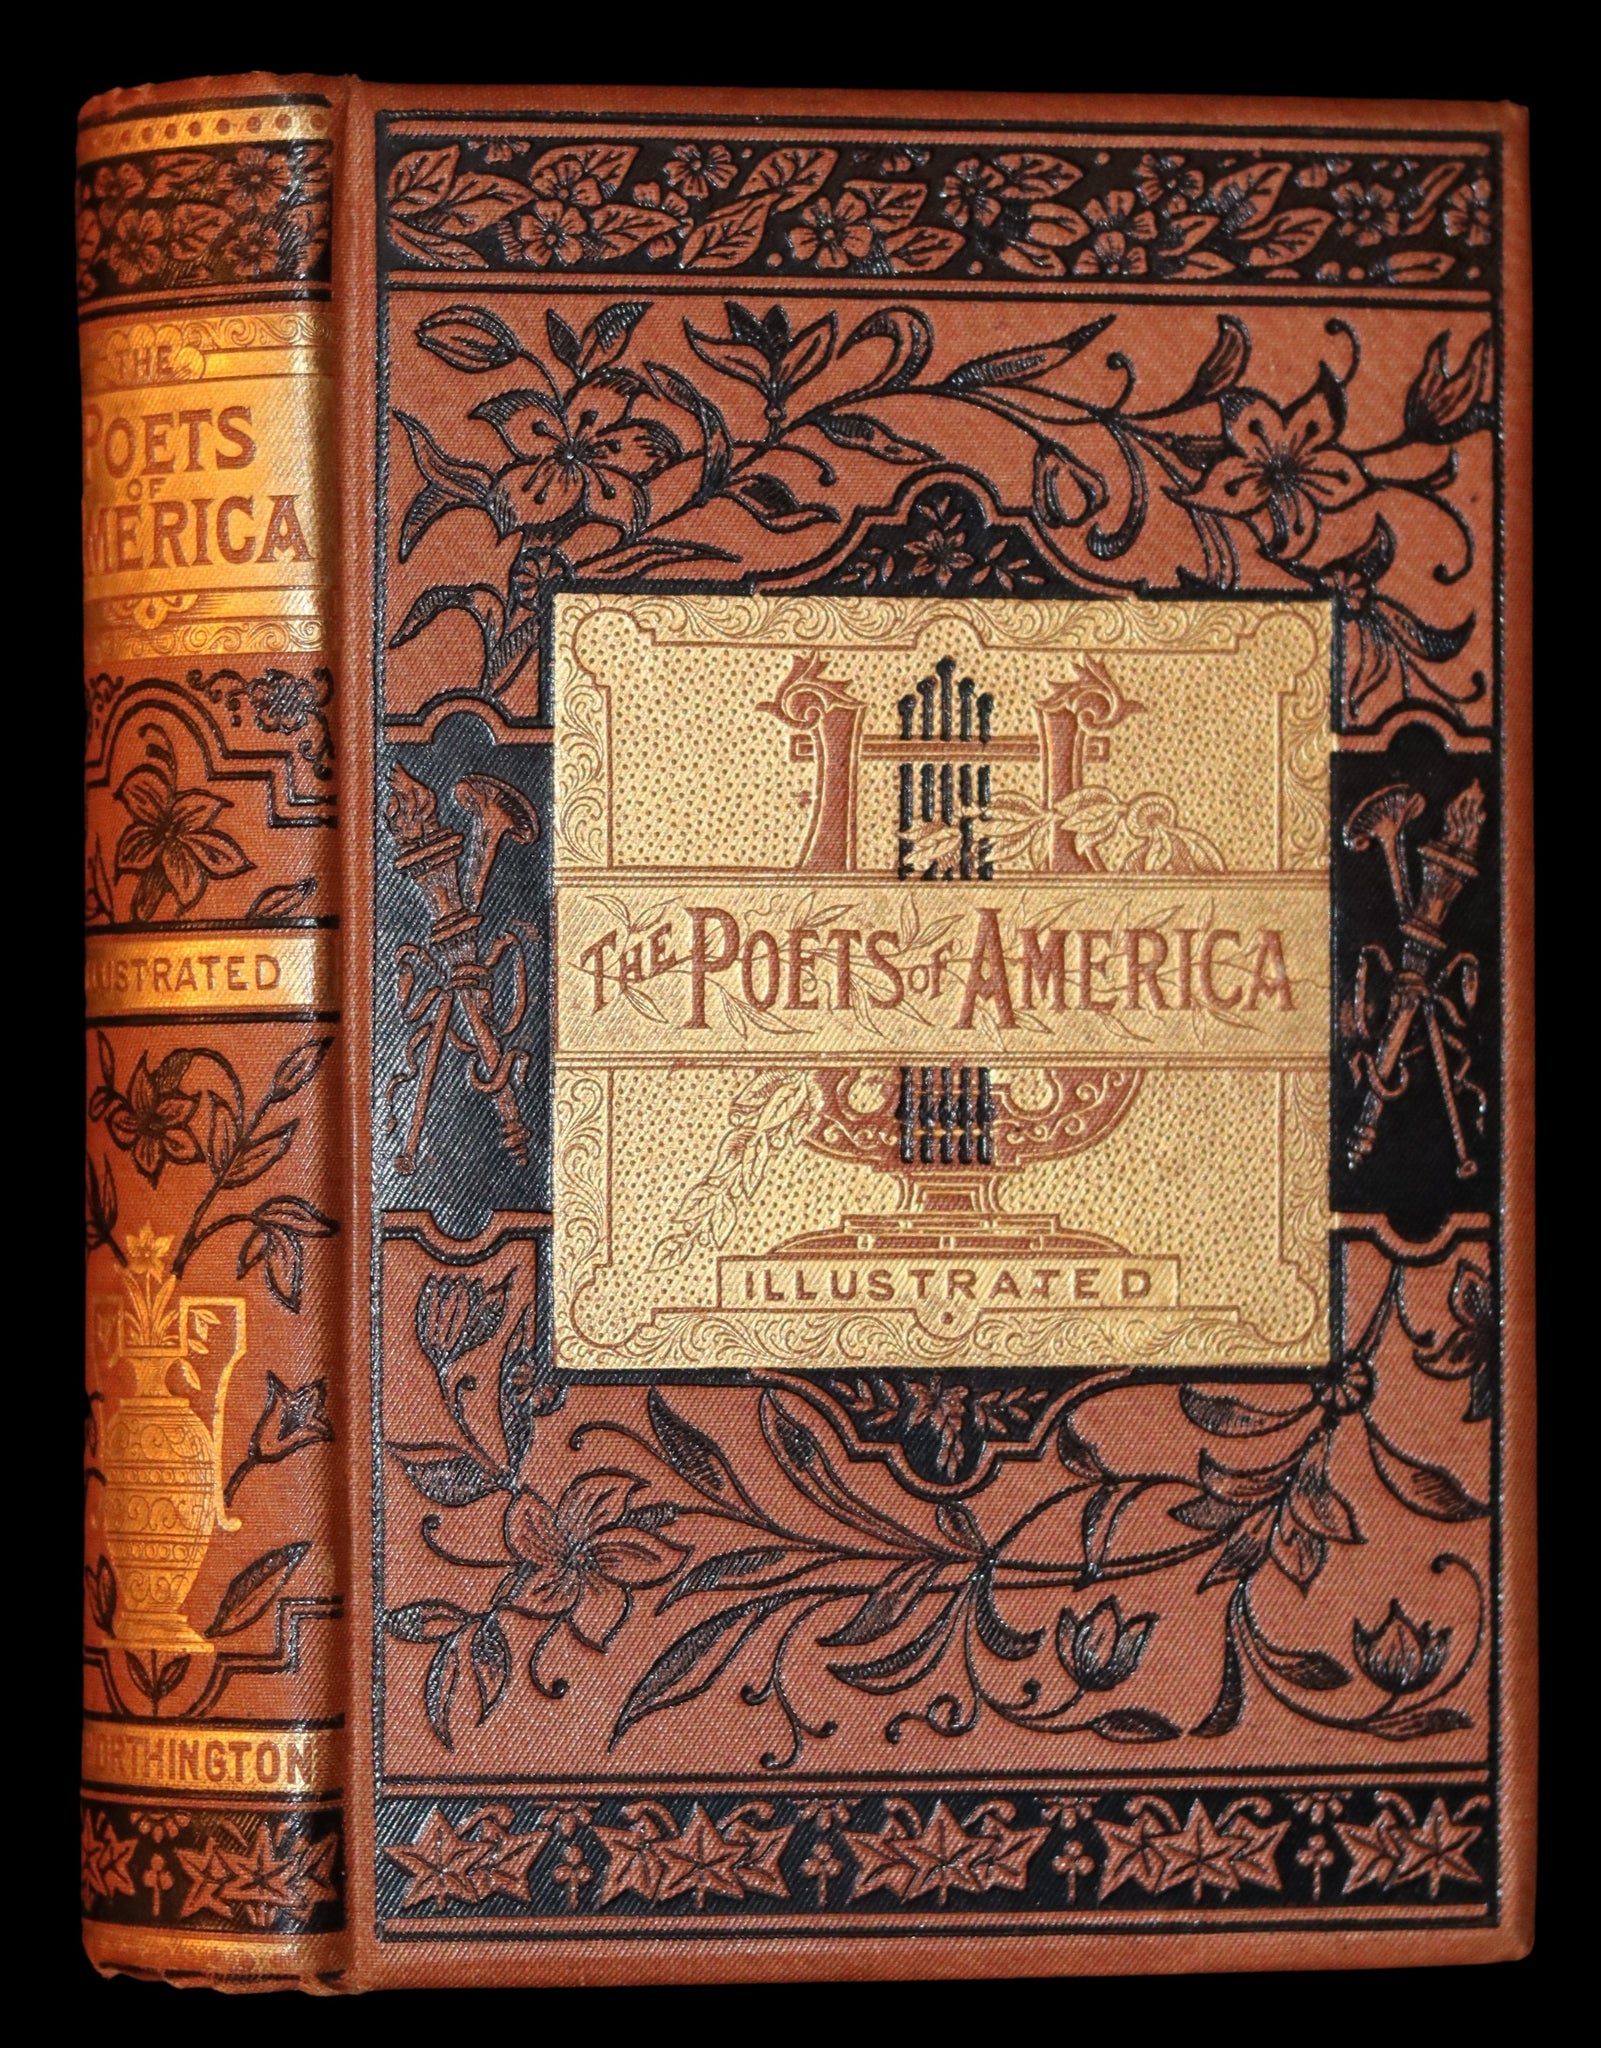 1880 Scarce Victorian Book - The POETS of AMERICA With Explanatory Notes by George B. Cheever.